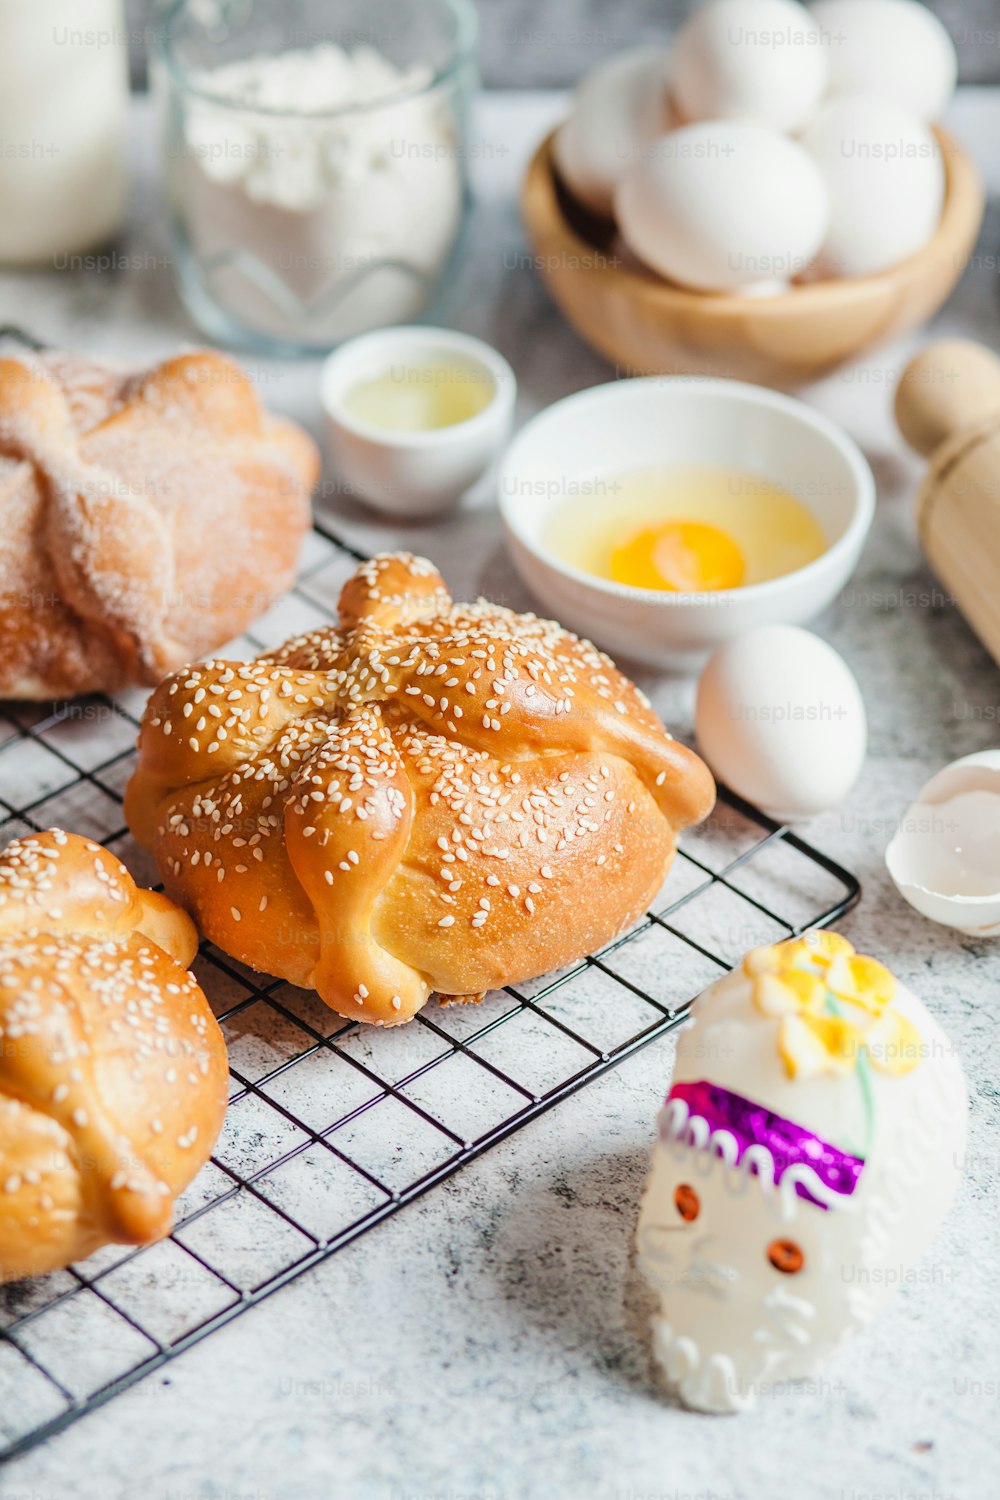 Pan de Muerto, ingredients for Mexican bread recipe traditional for day of the Dead in Mexico